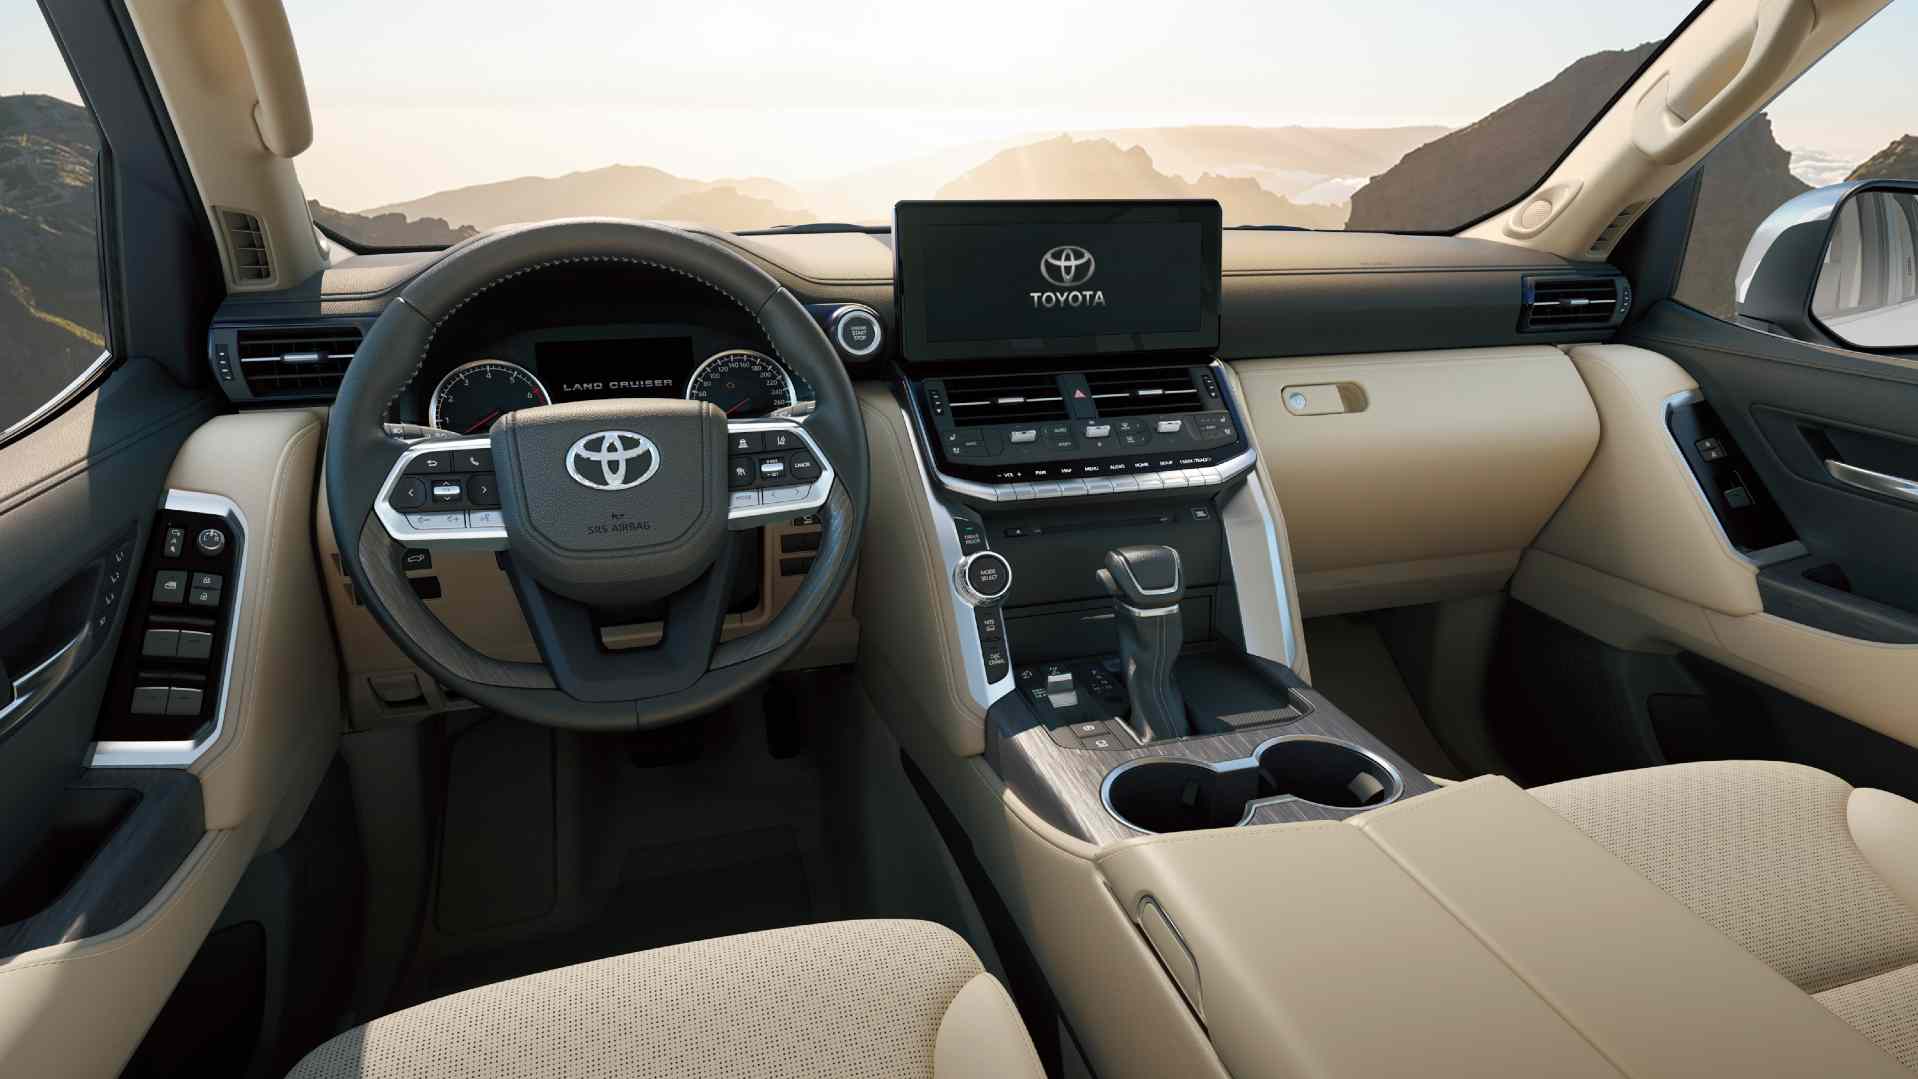 9.0-inch touchscreen takes centrestage on the Land Cruiser LC 300's all-new dashboard. Image: Toyota